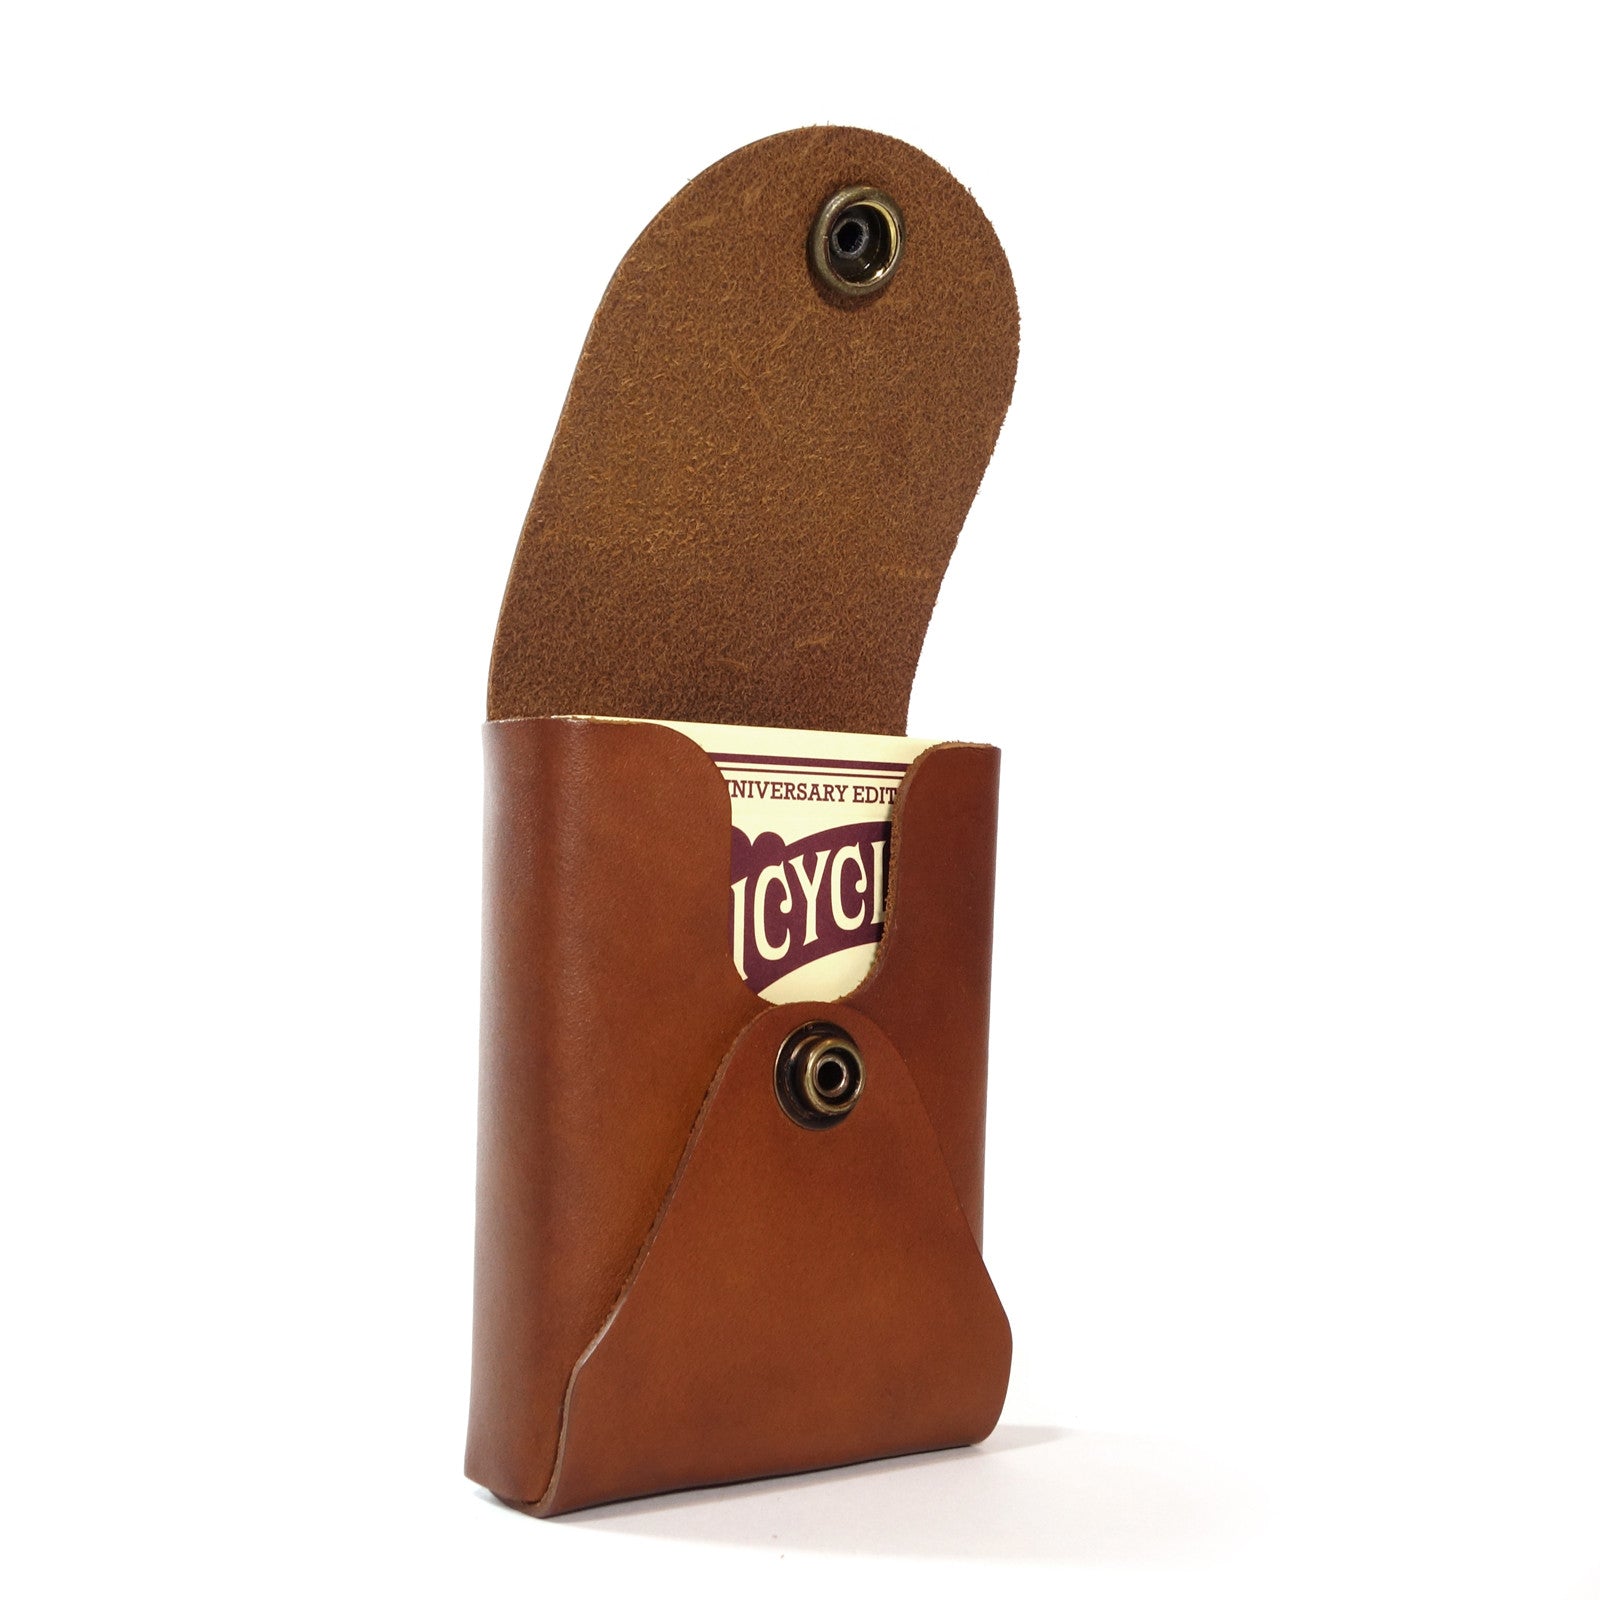 Playing Cards With Leather Case